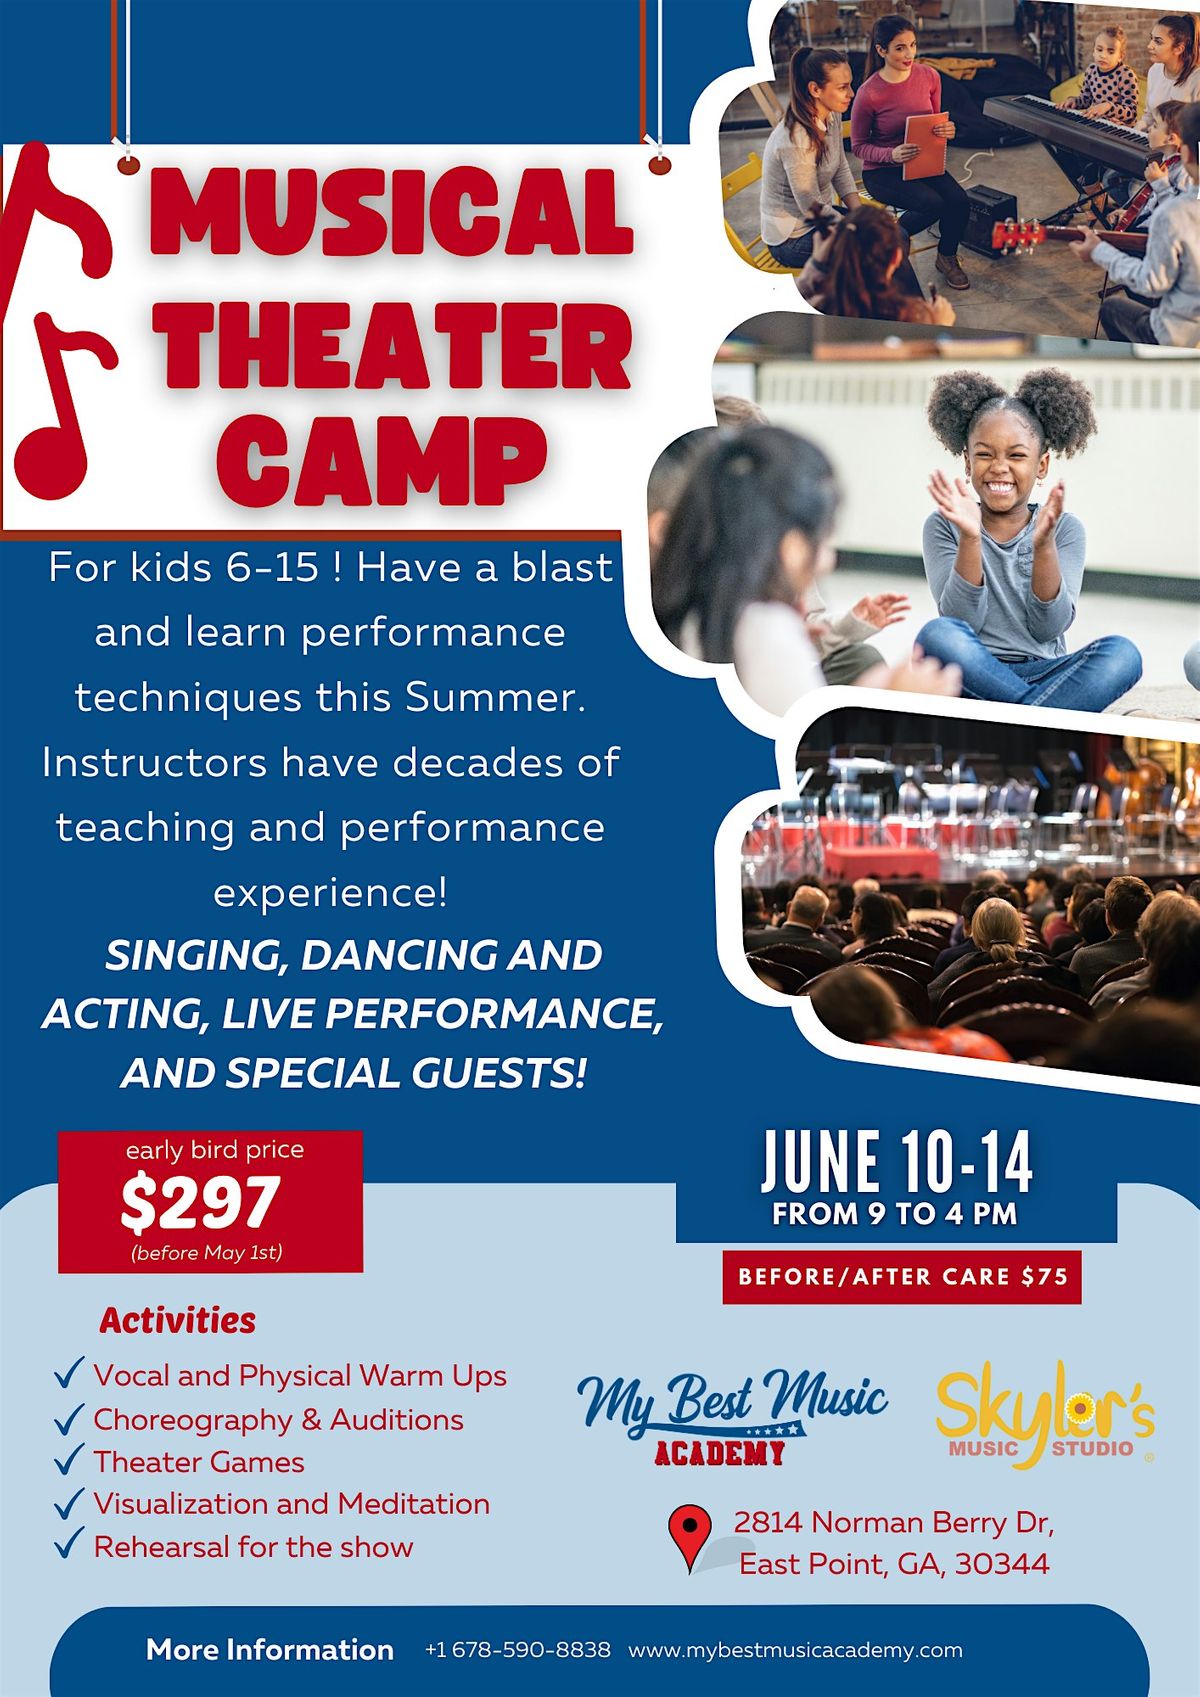 Musical Theater Camp